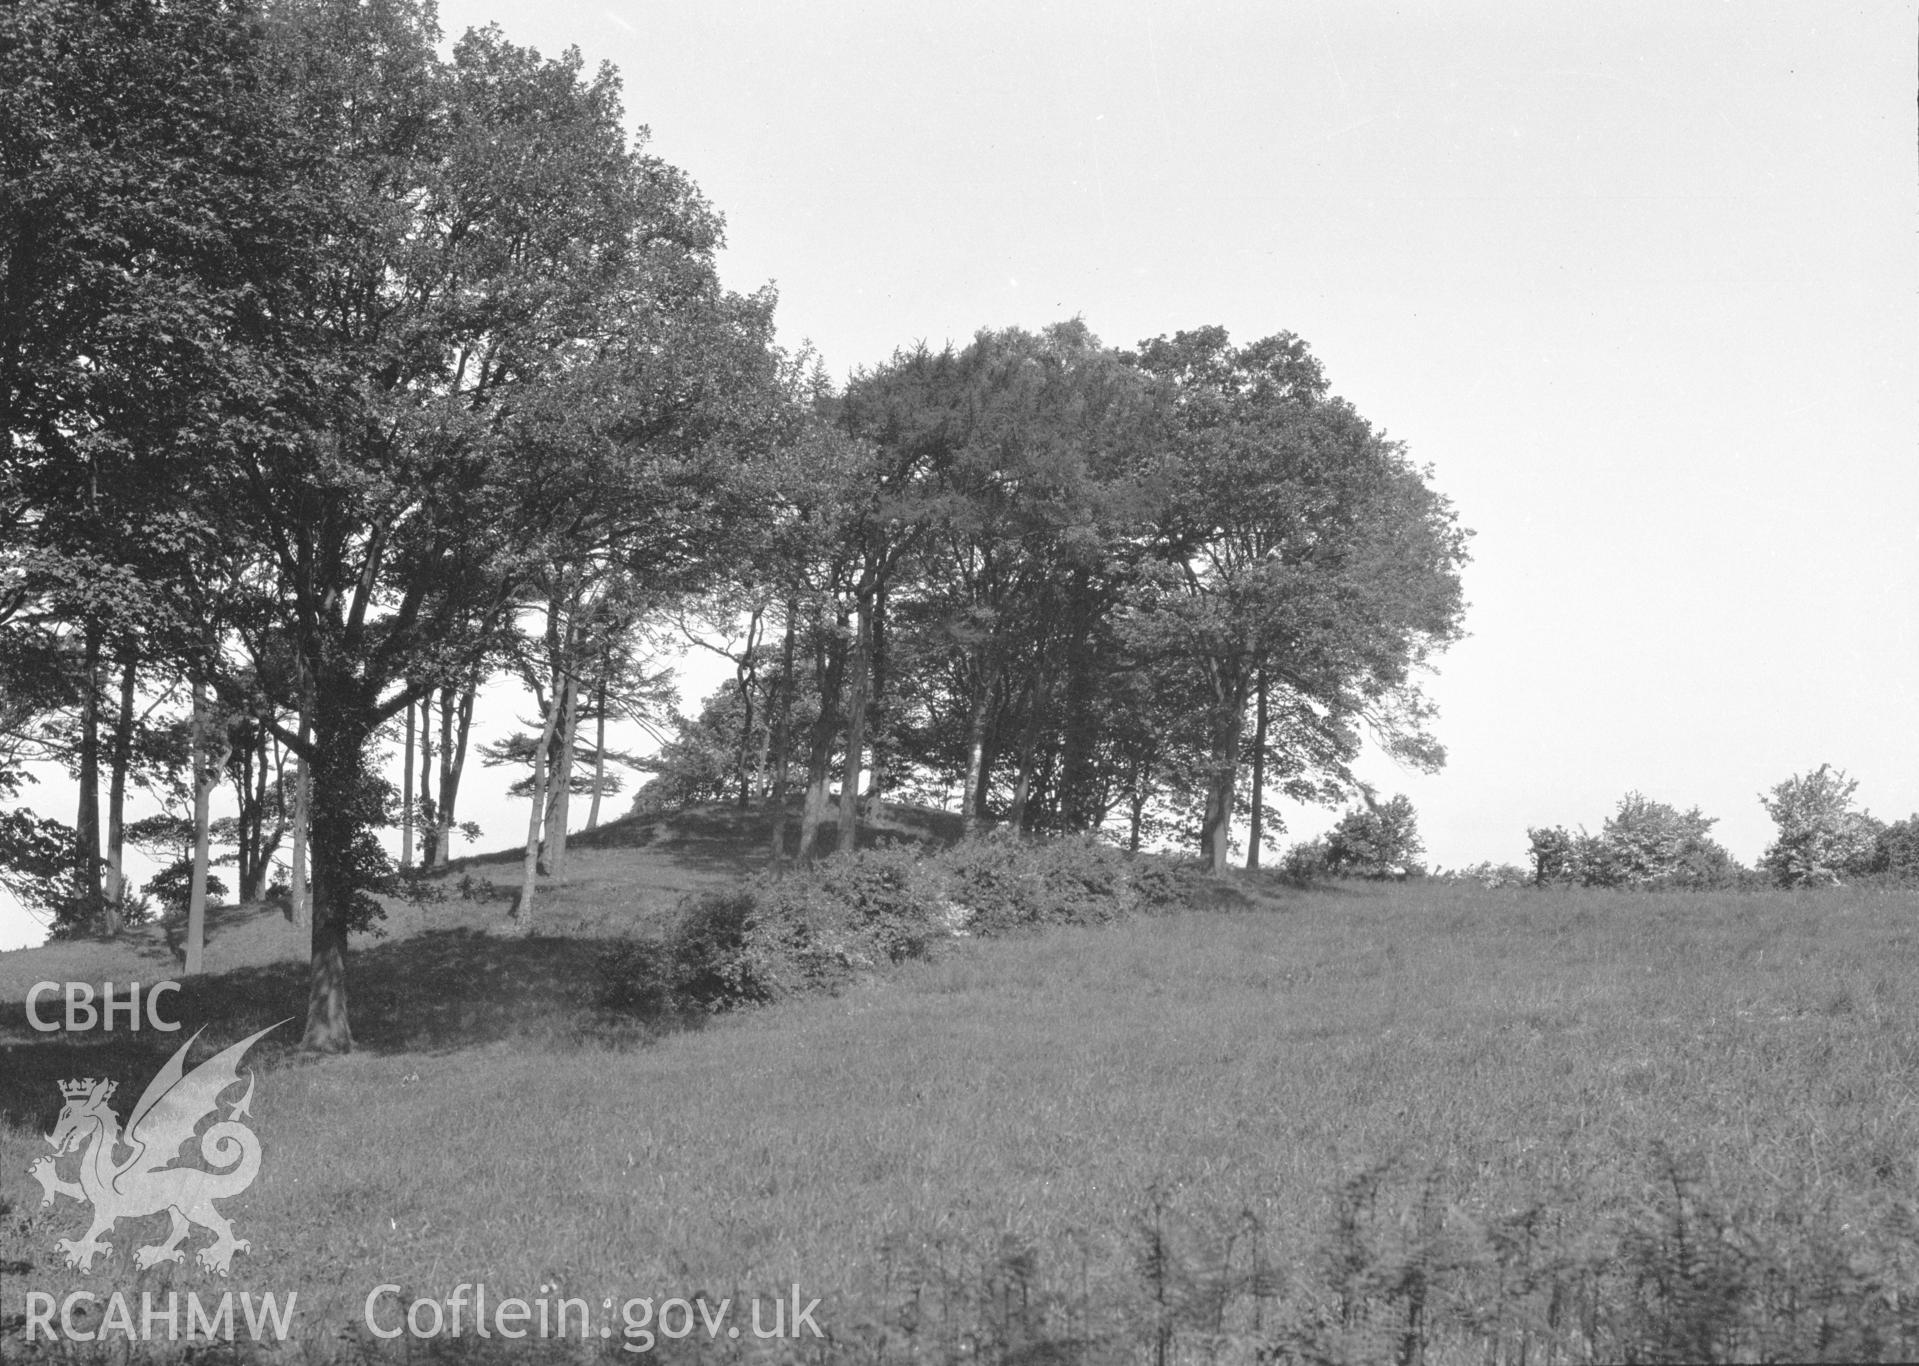 Digital copy of a nitrate negative showing Bryn Digrif Barrows. Transcript of the reverse of the printed photograph: 'Flint 268 Whitford/ Bryn Digrif (2) Tumulus.' From the Cadw Monuments in Care Collection.